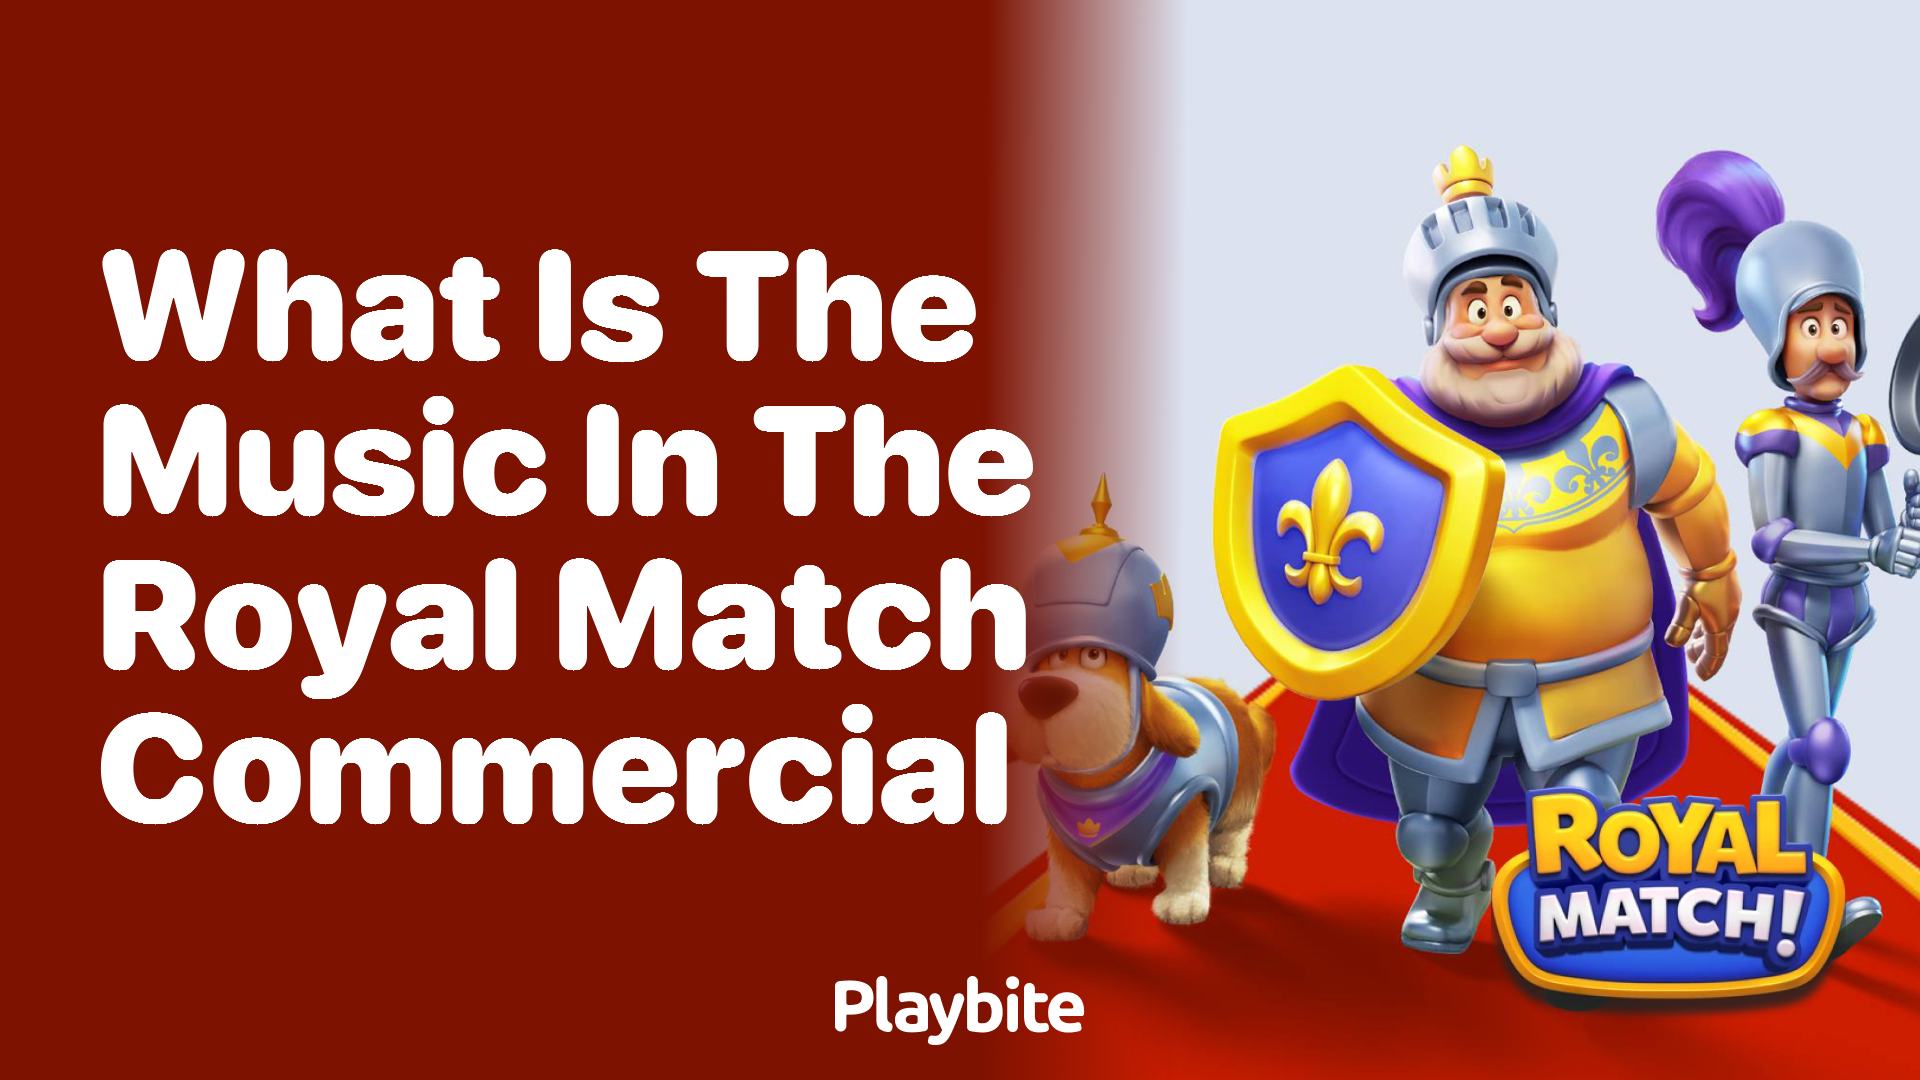 What Is the Music in the Royal Match Commercial?